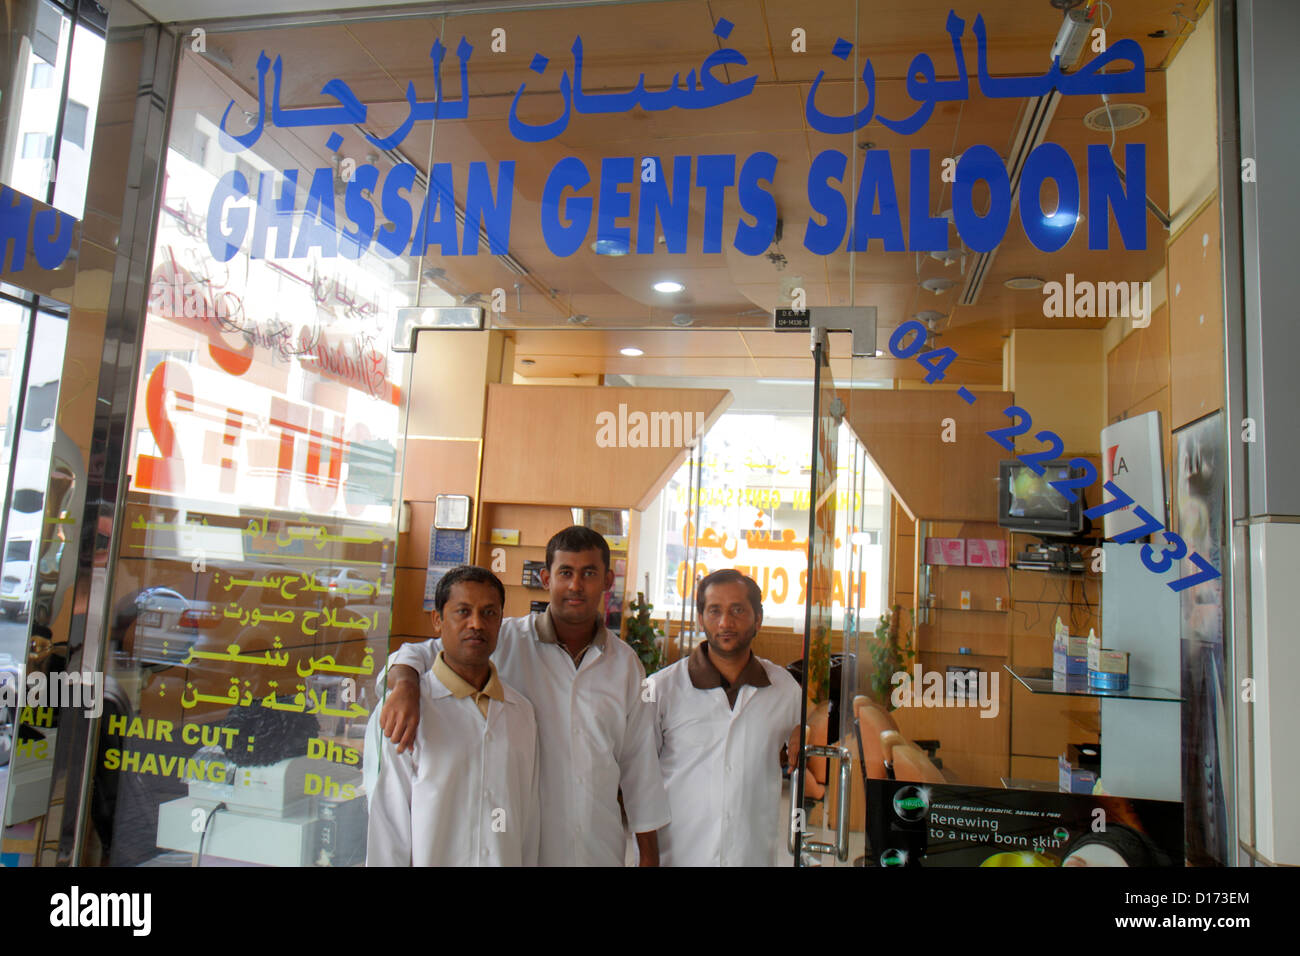 Dubai UAE,United Arab Emirates,Deira,Al Rigga,Ghassan Gents Saloon,barber,hair  stylist,migrant worker,workers,foreign laborer,labor,labour,resident,re  Stock Photo - Alamy